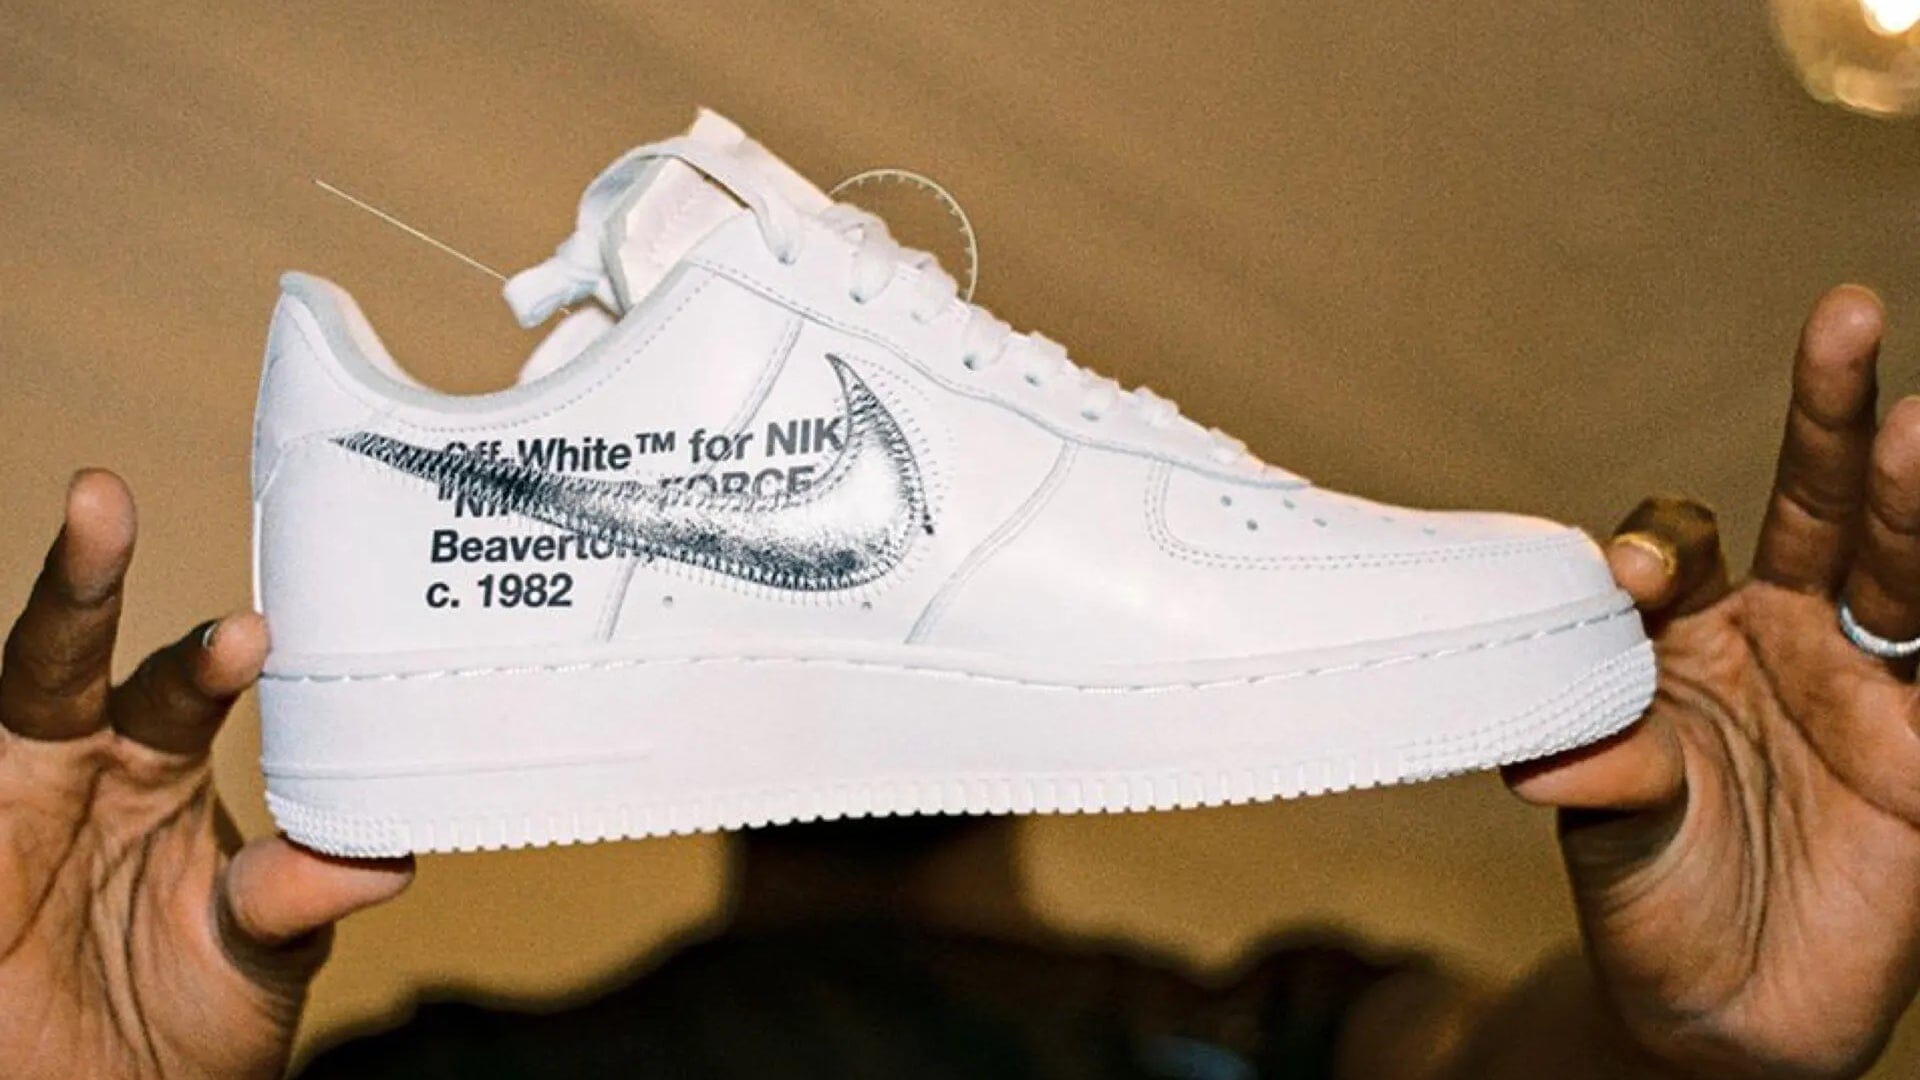 The history of the Nike Air Force 1